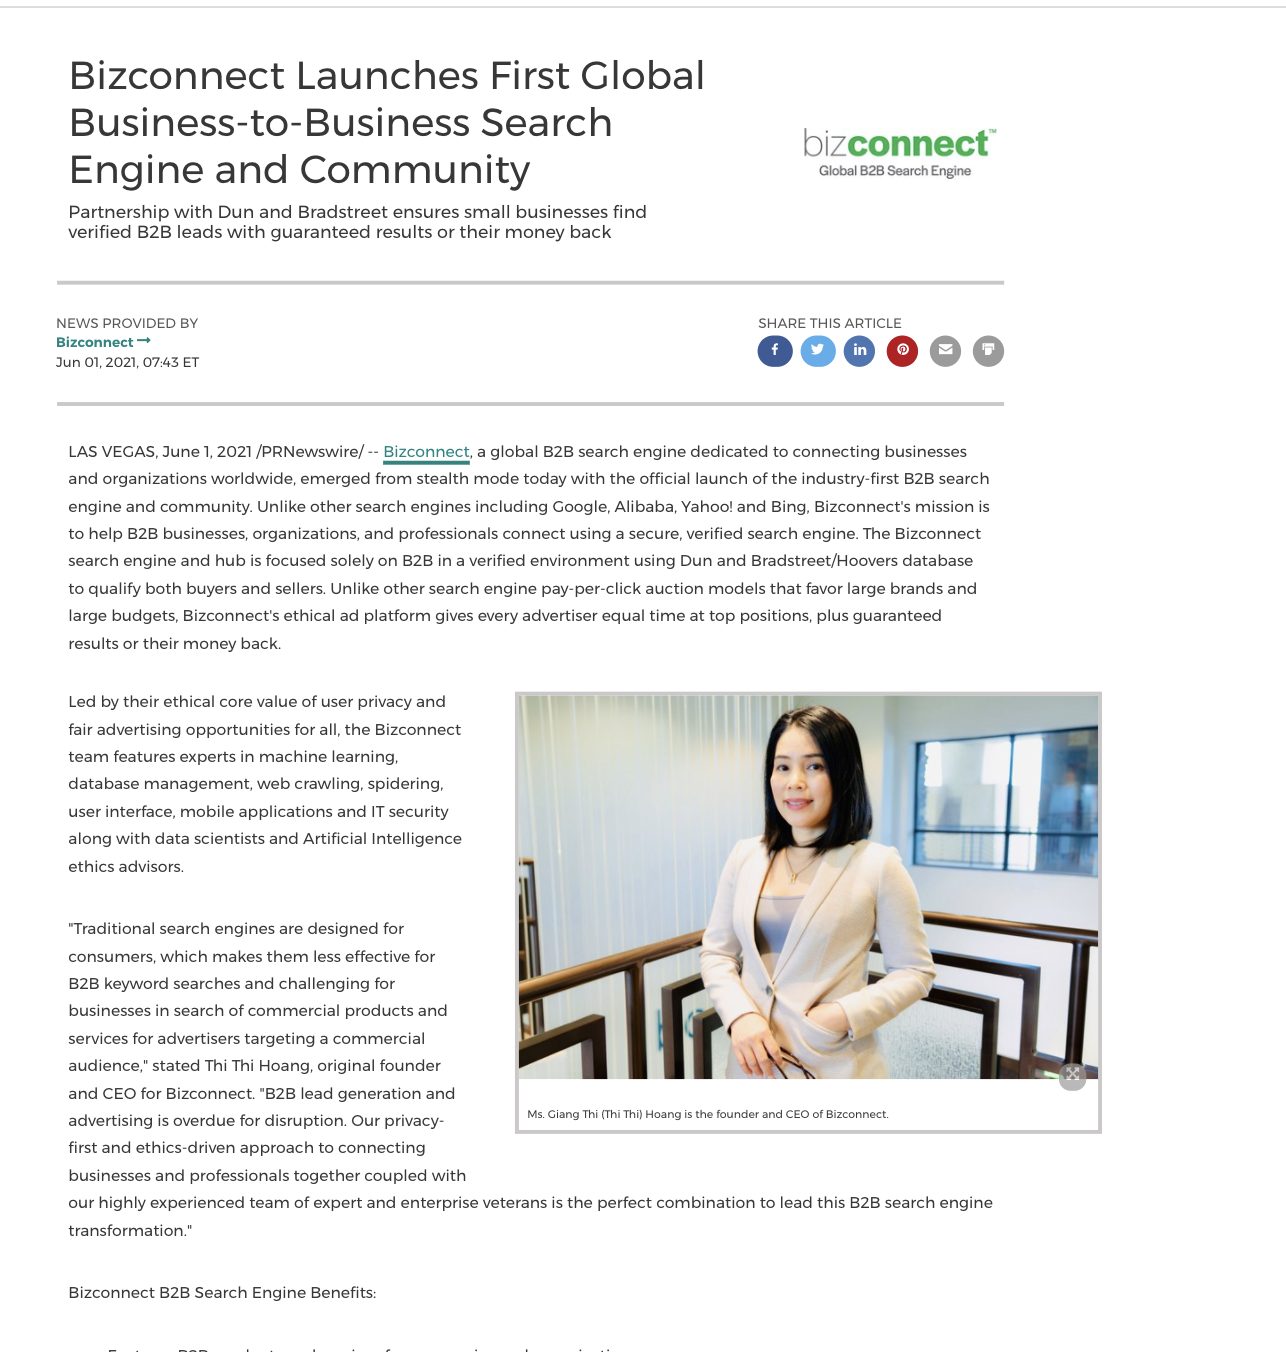 Giang Hoang now working with Biz Connect